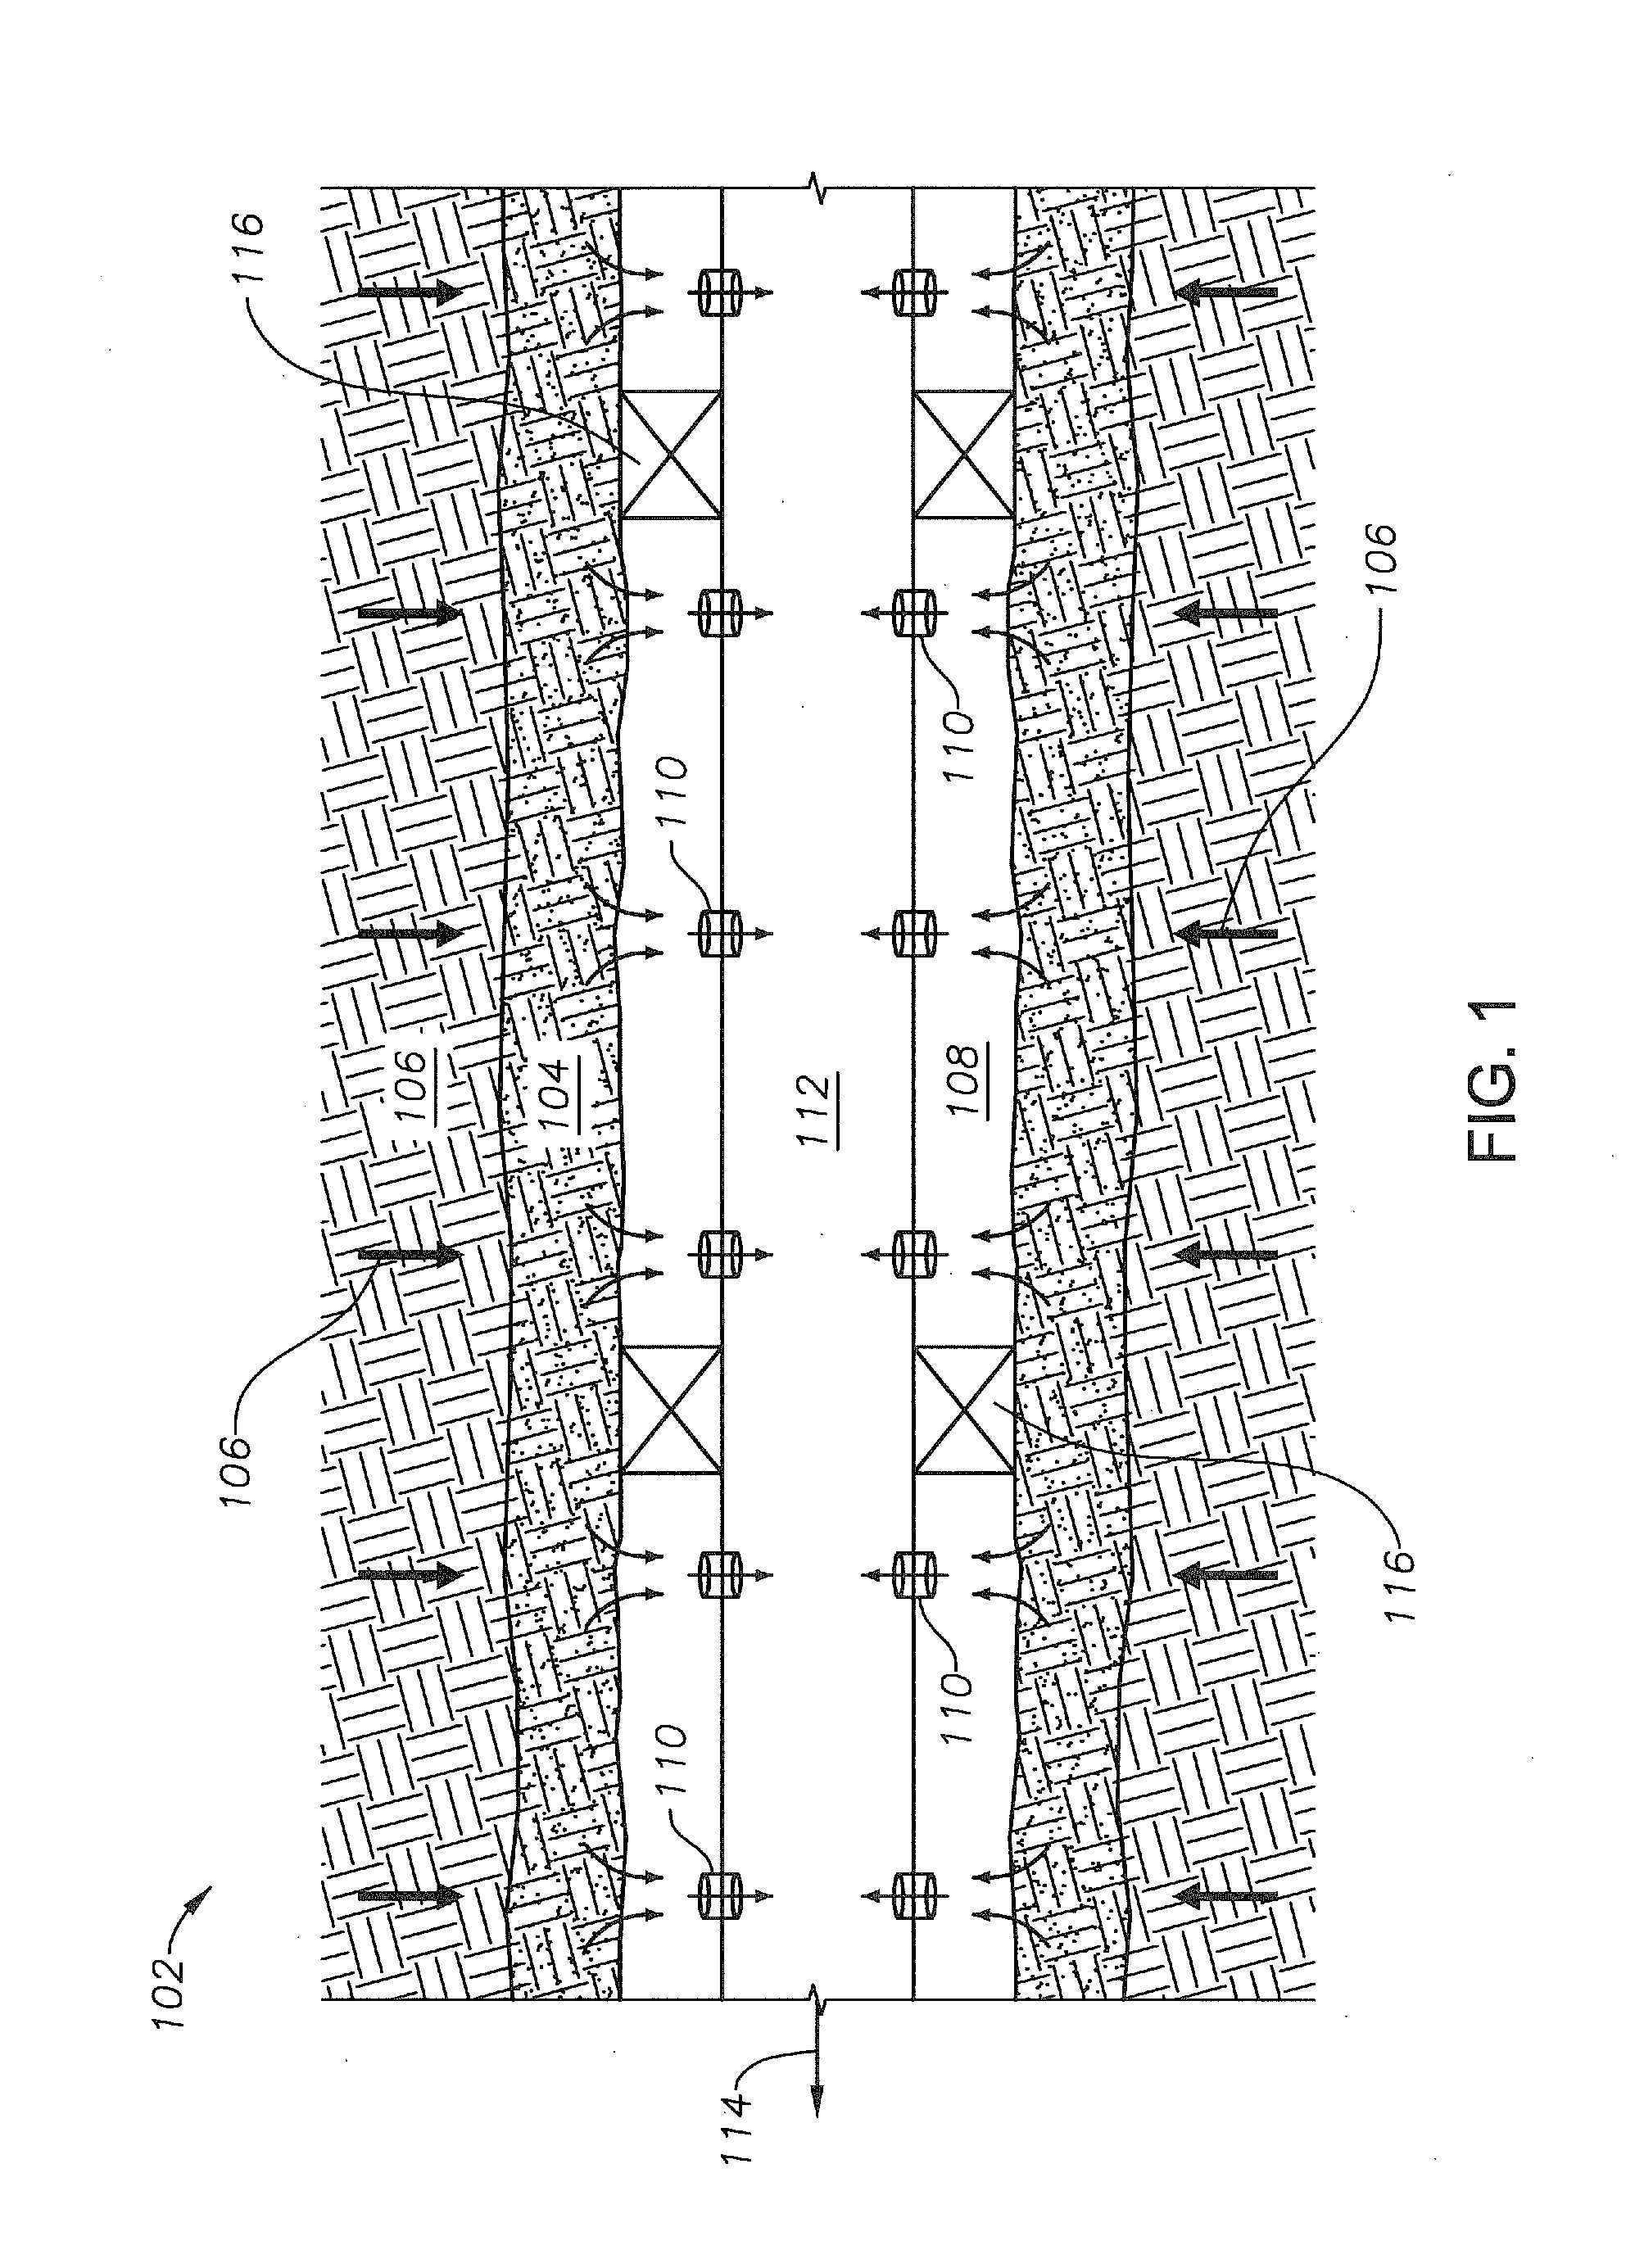 Method for transient testing of oil wells completed with inflow control devices